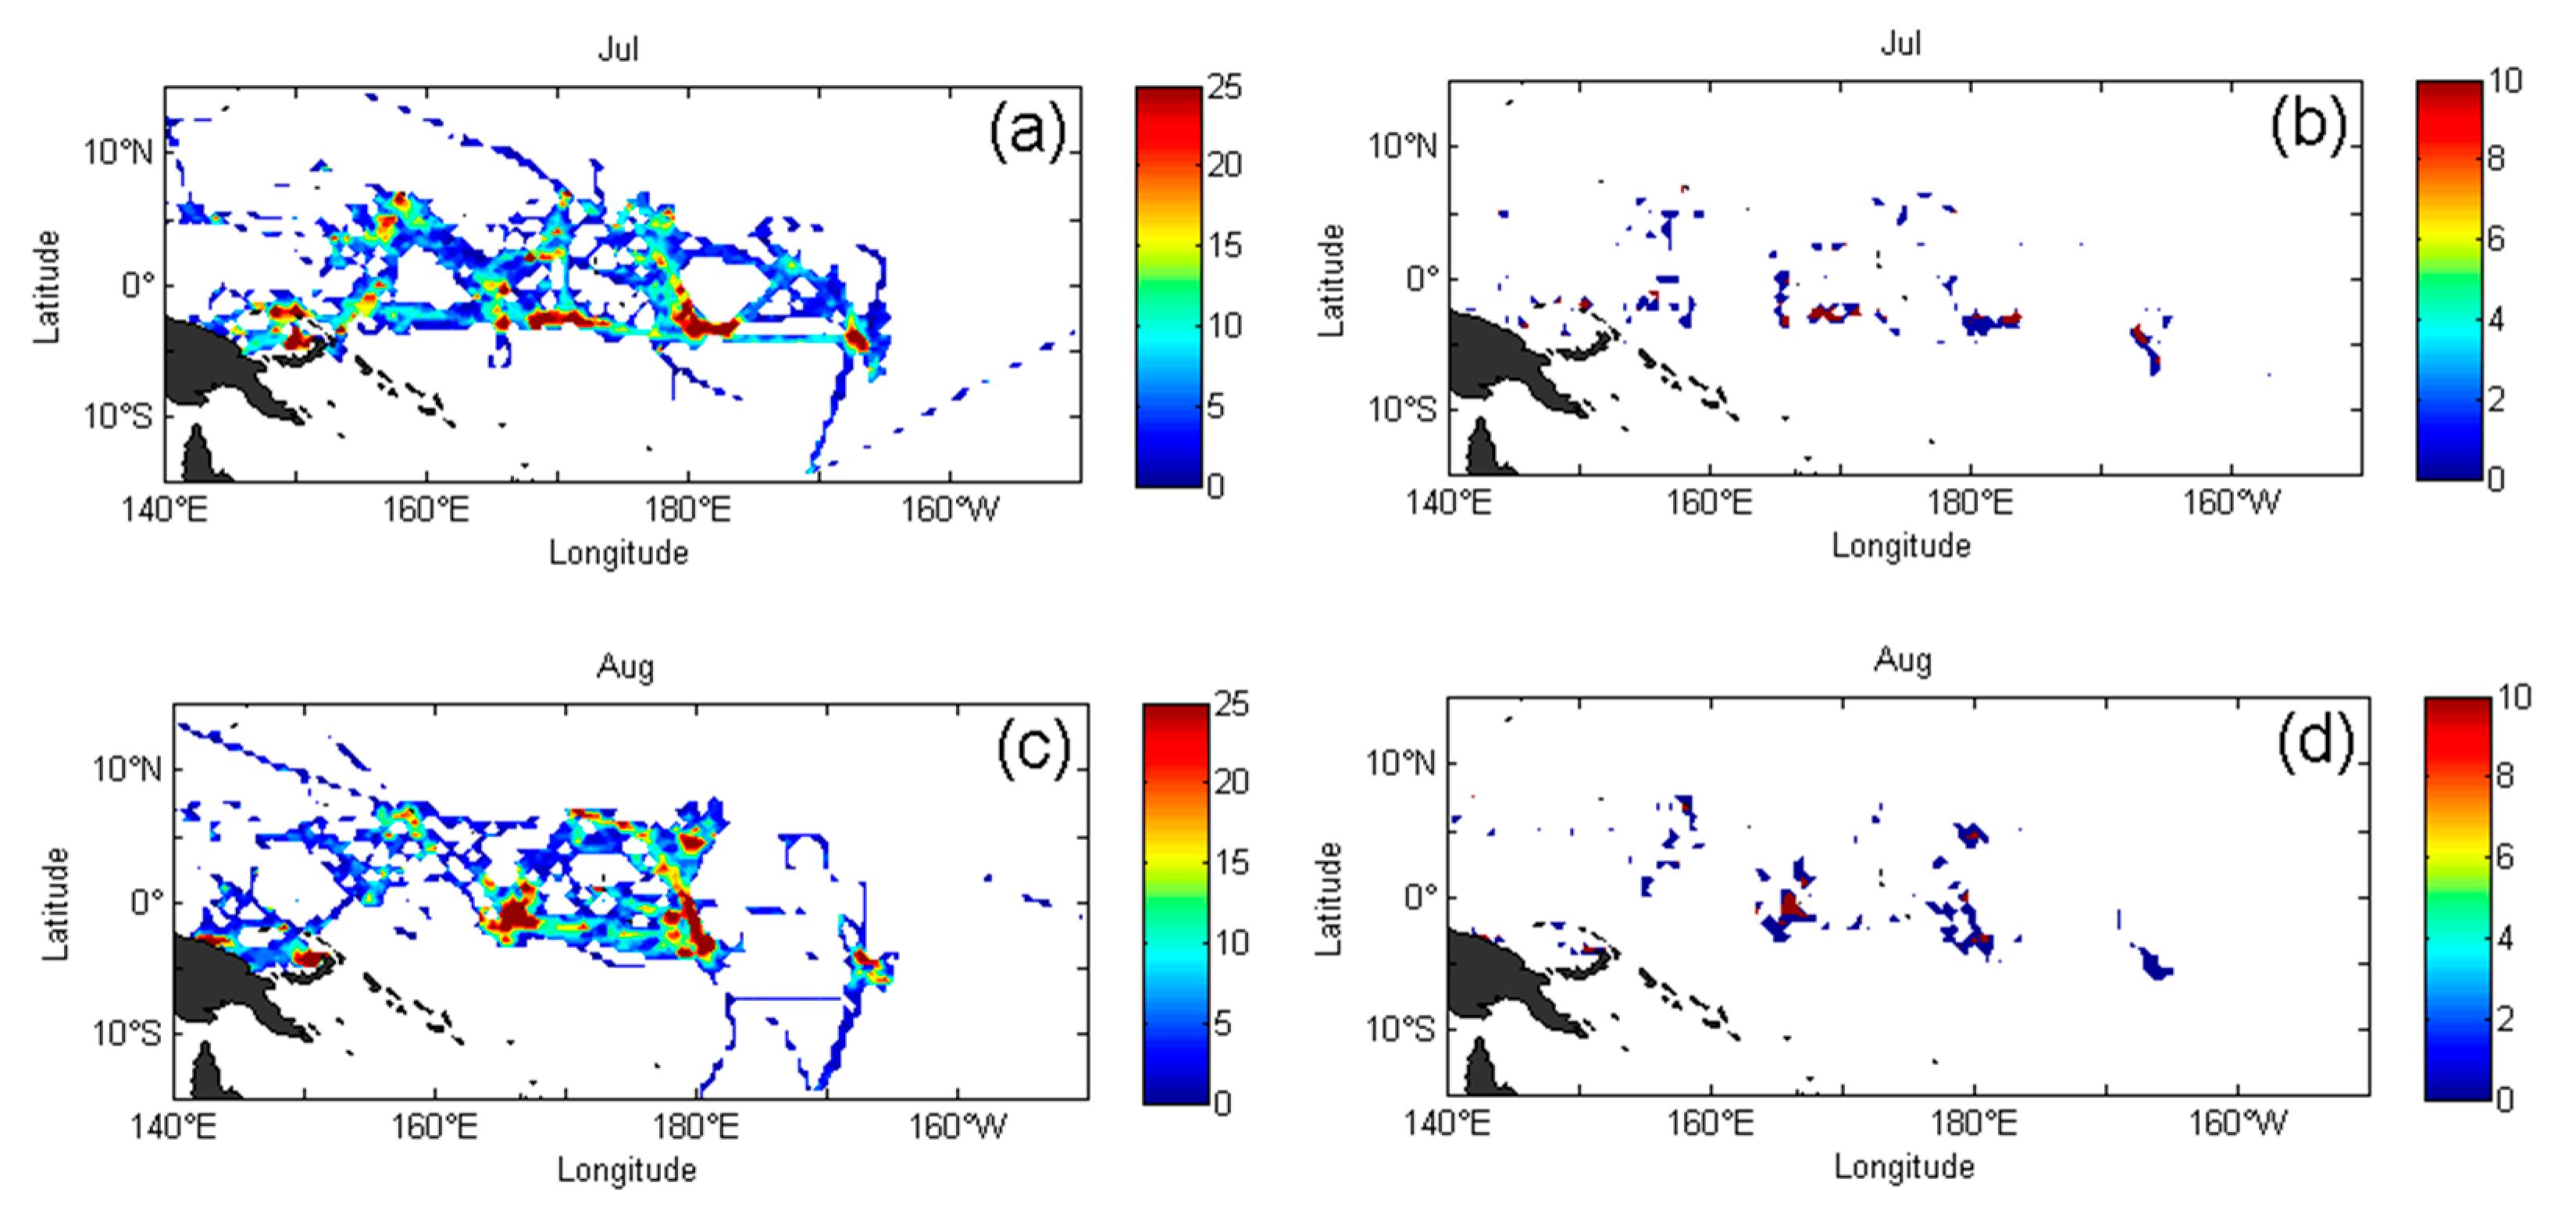 Jmse Free Full Text Spatial Analysis Of The Fishing Behaviour Of Tuna Purse Seiners In The Western And Central Pacific Based On Vessel Trajectory Data Html